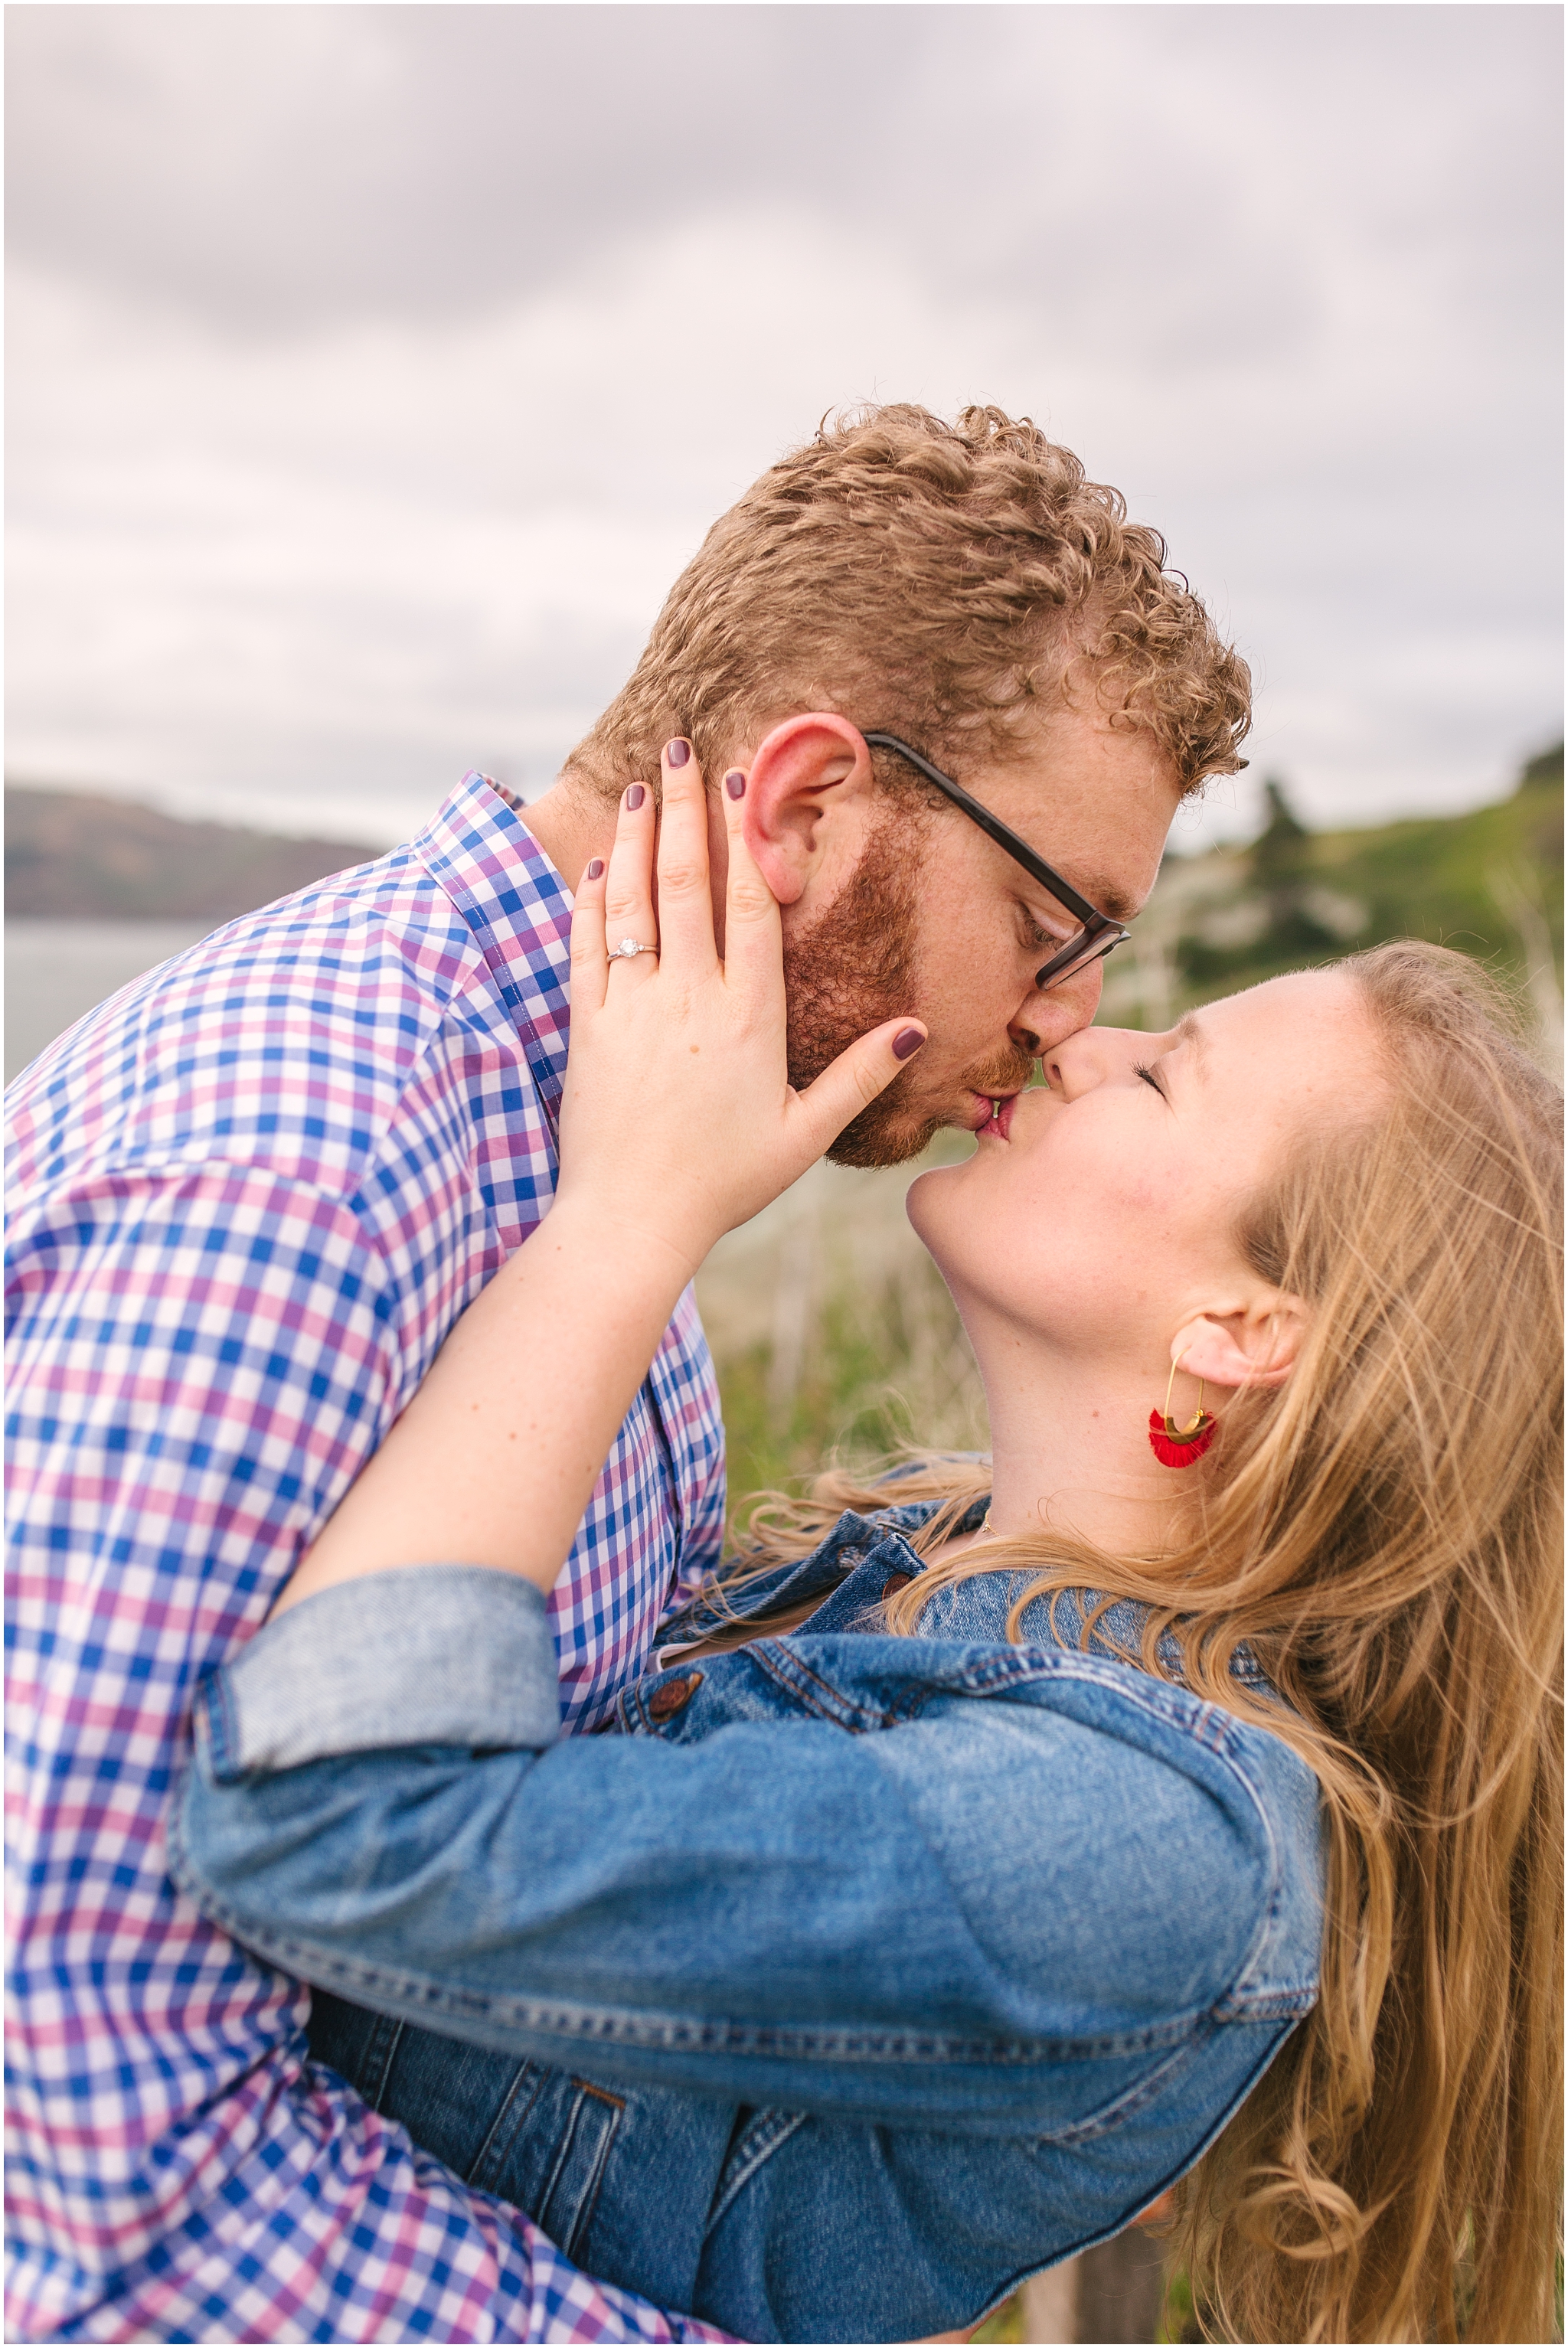 Couple kissing passionately - Marshall Beach San Francisco engagement pictures